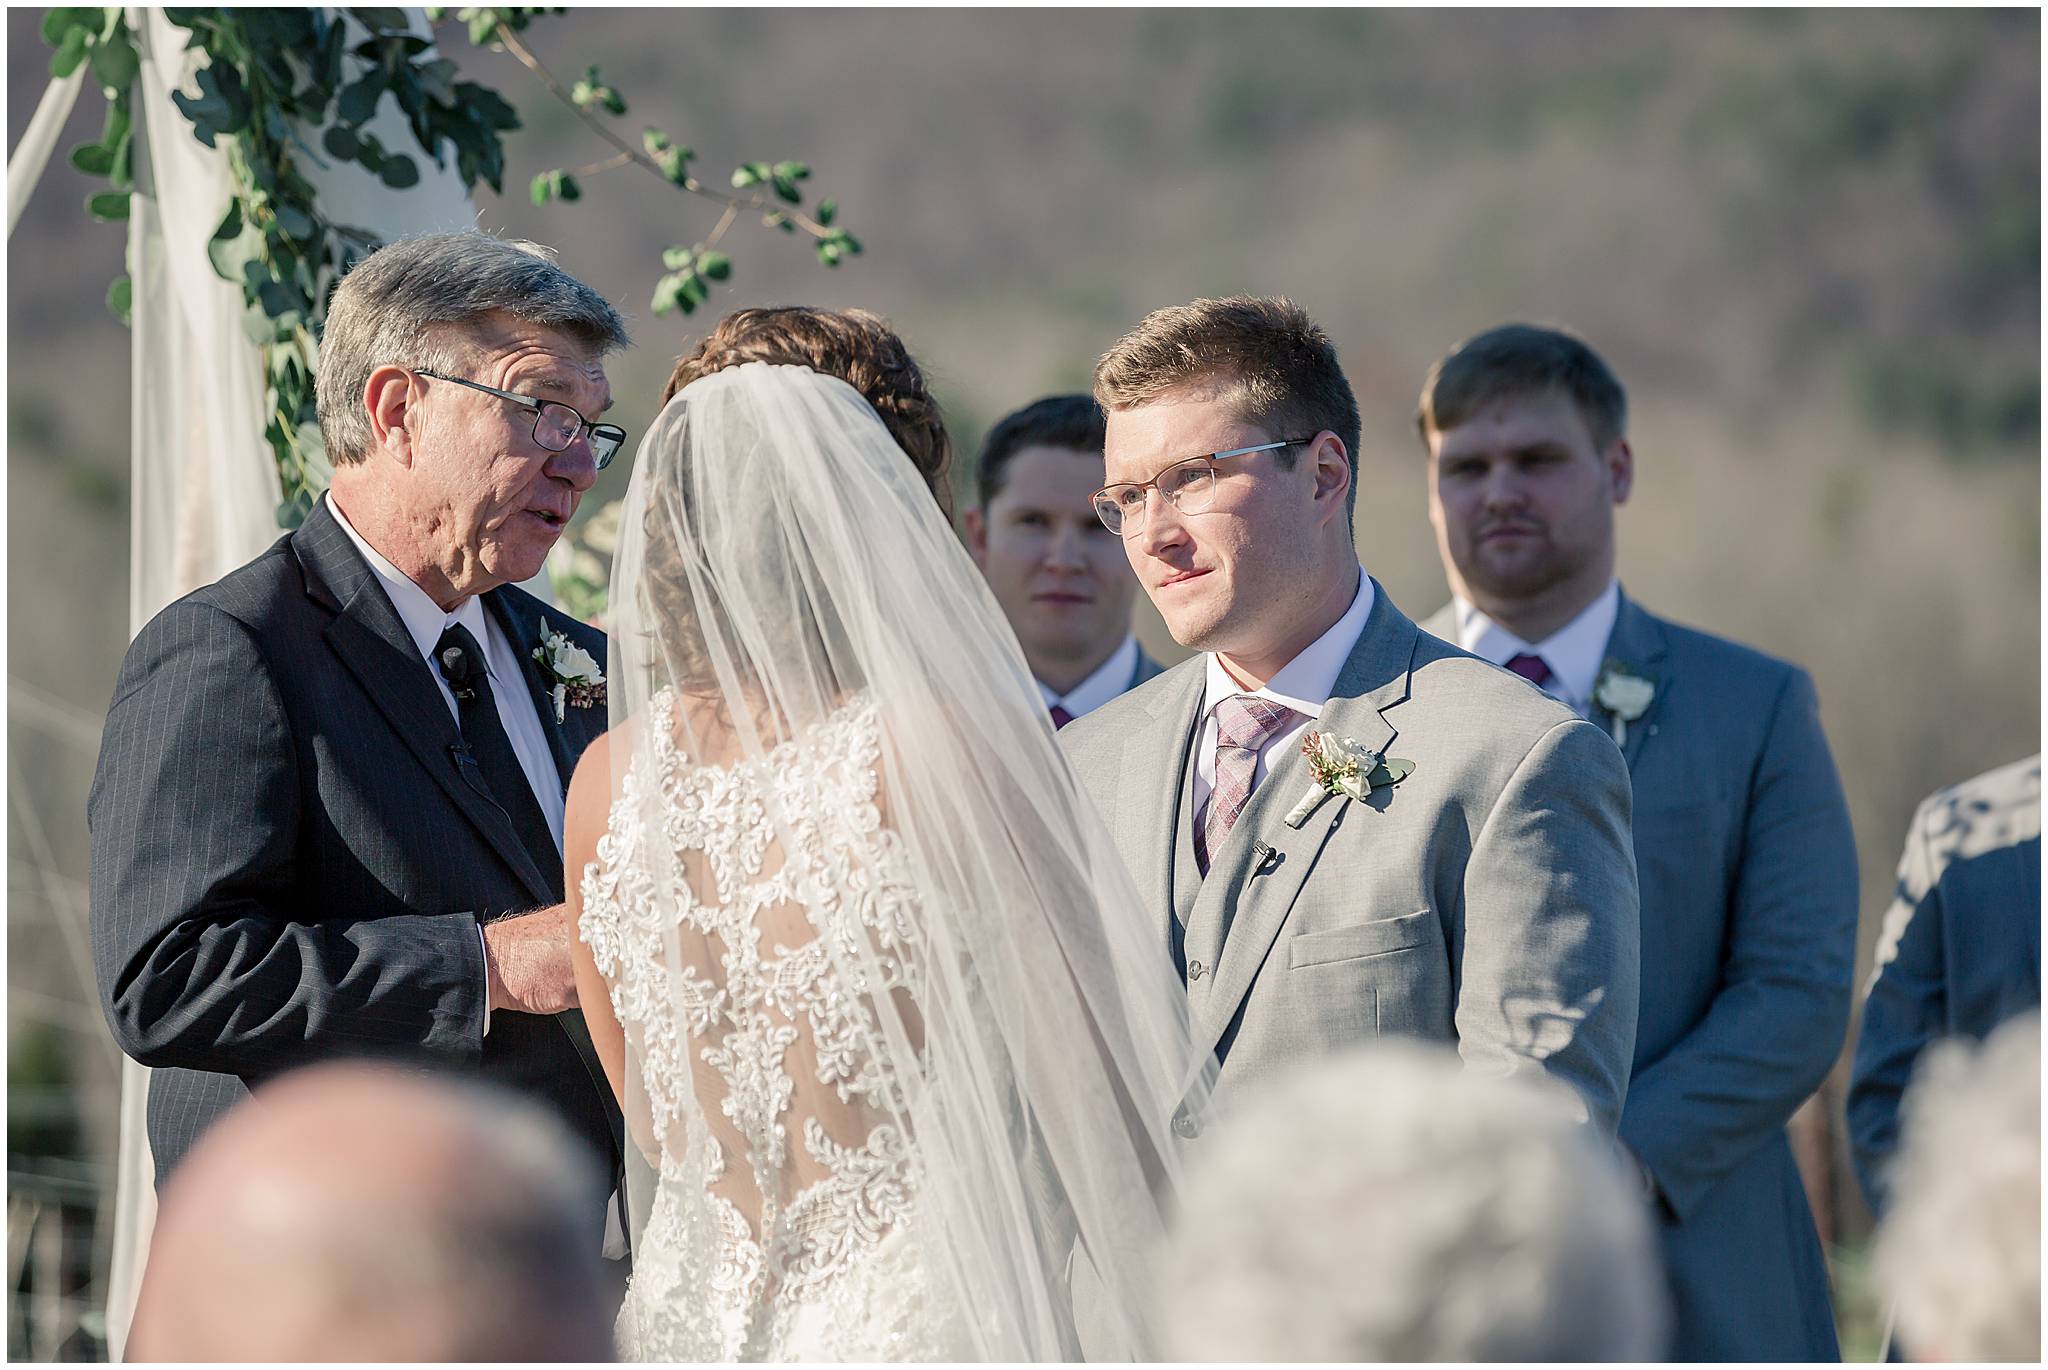 wedding ceremony Pictures at Yonah Mountain Vineyard